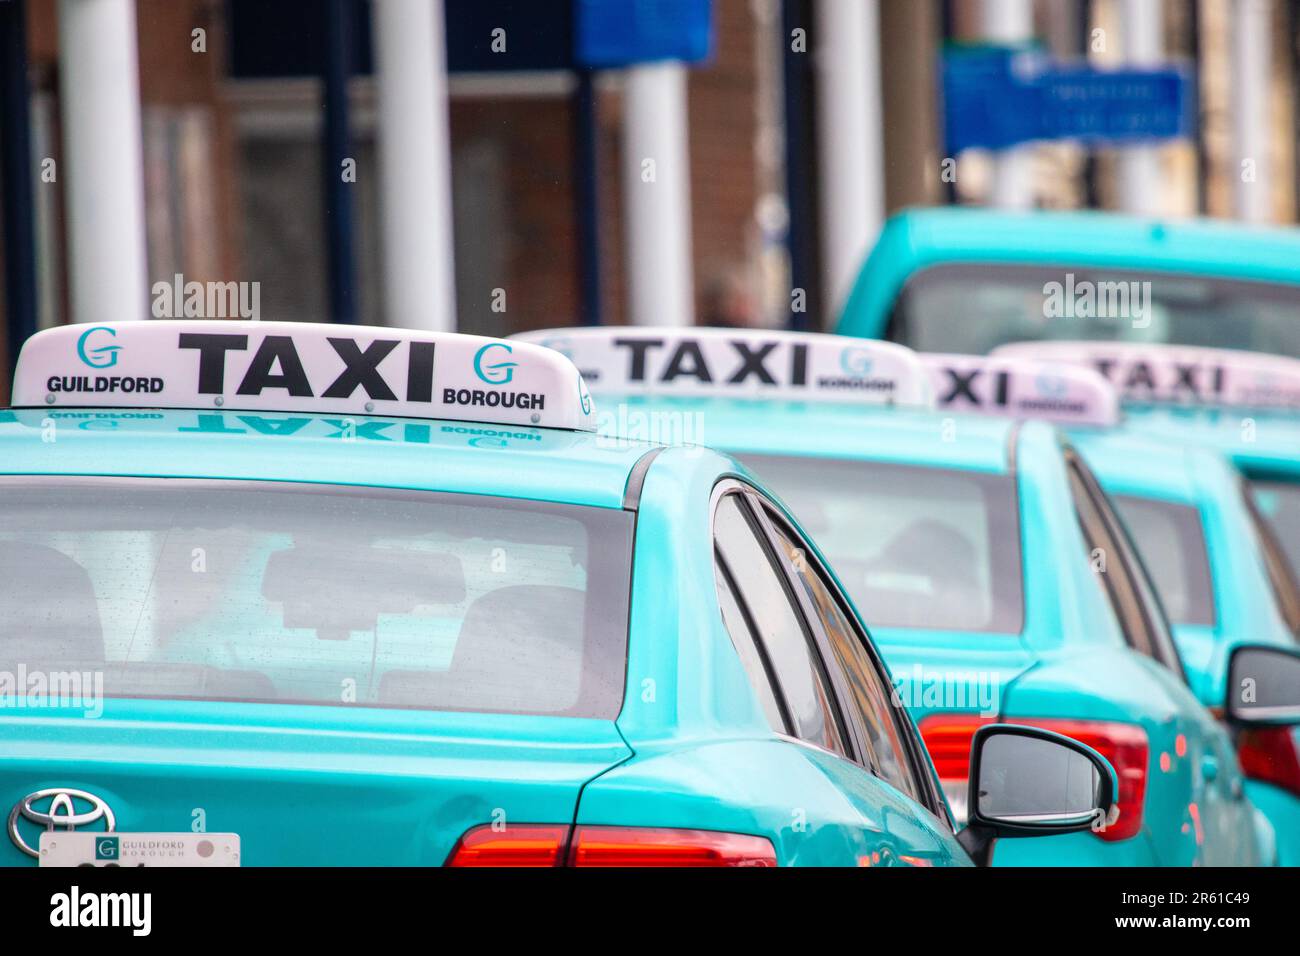 Surrey, UK - April 5th 2023: A line of Taxis, outside Guildford Railway Station in Surrey, UK. Stock Photo